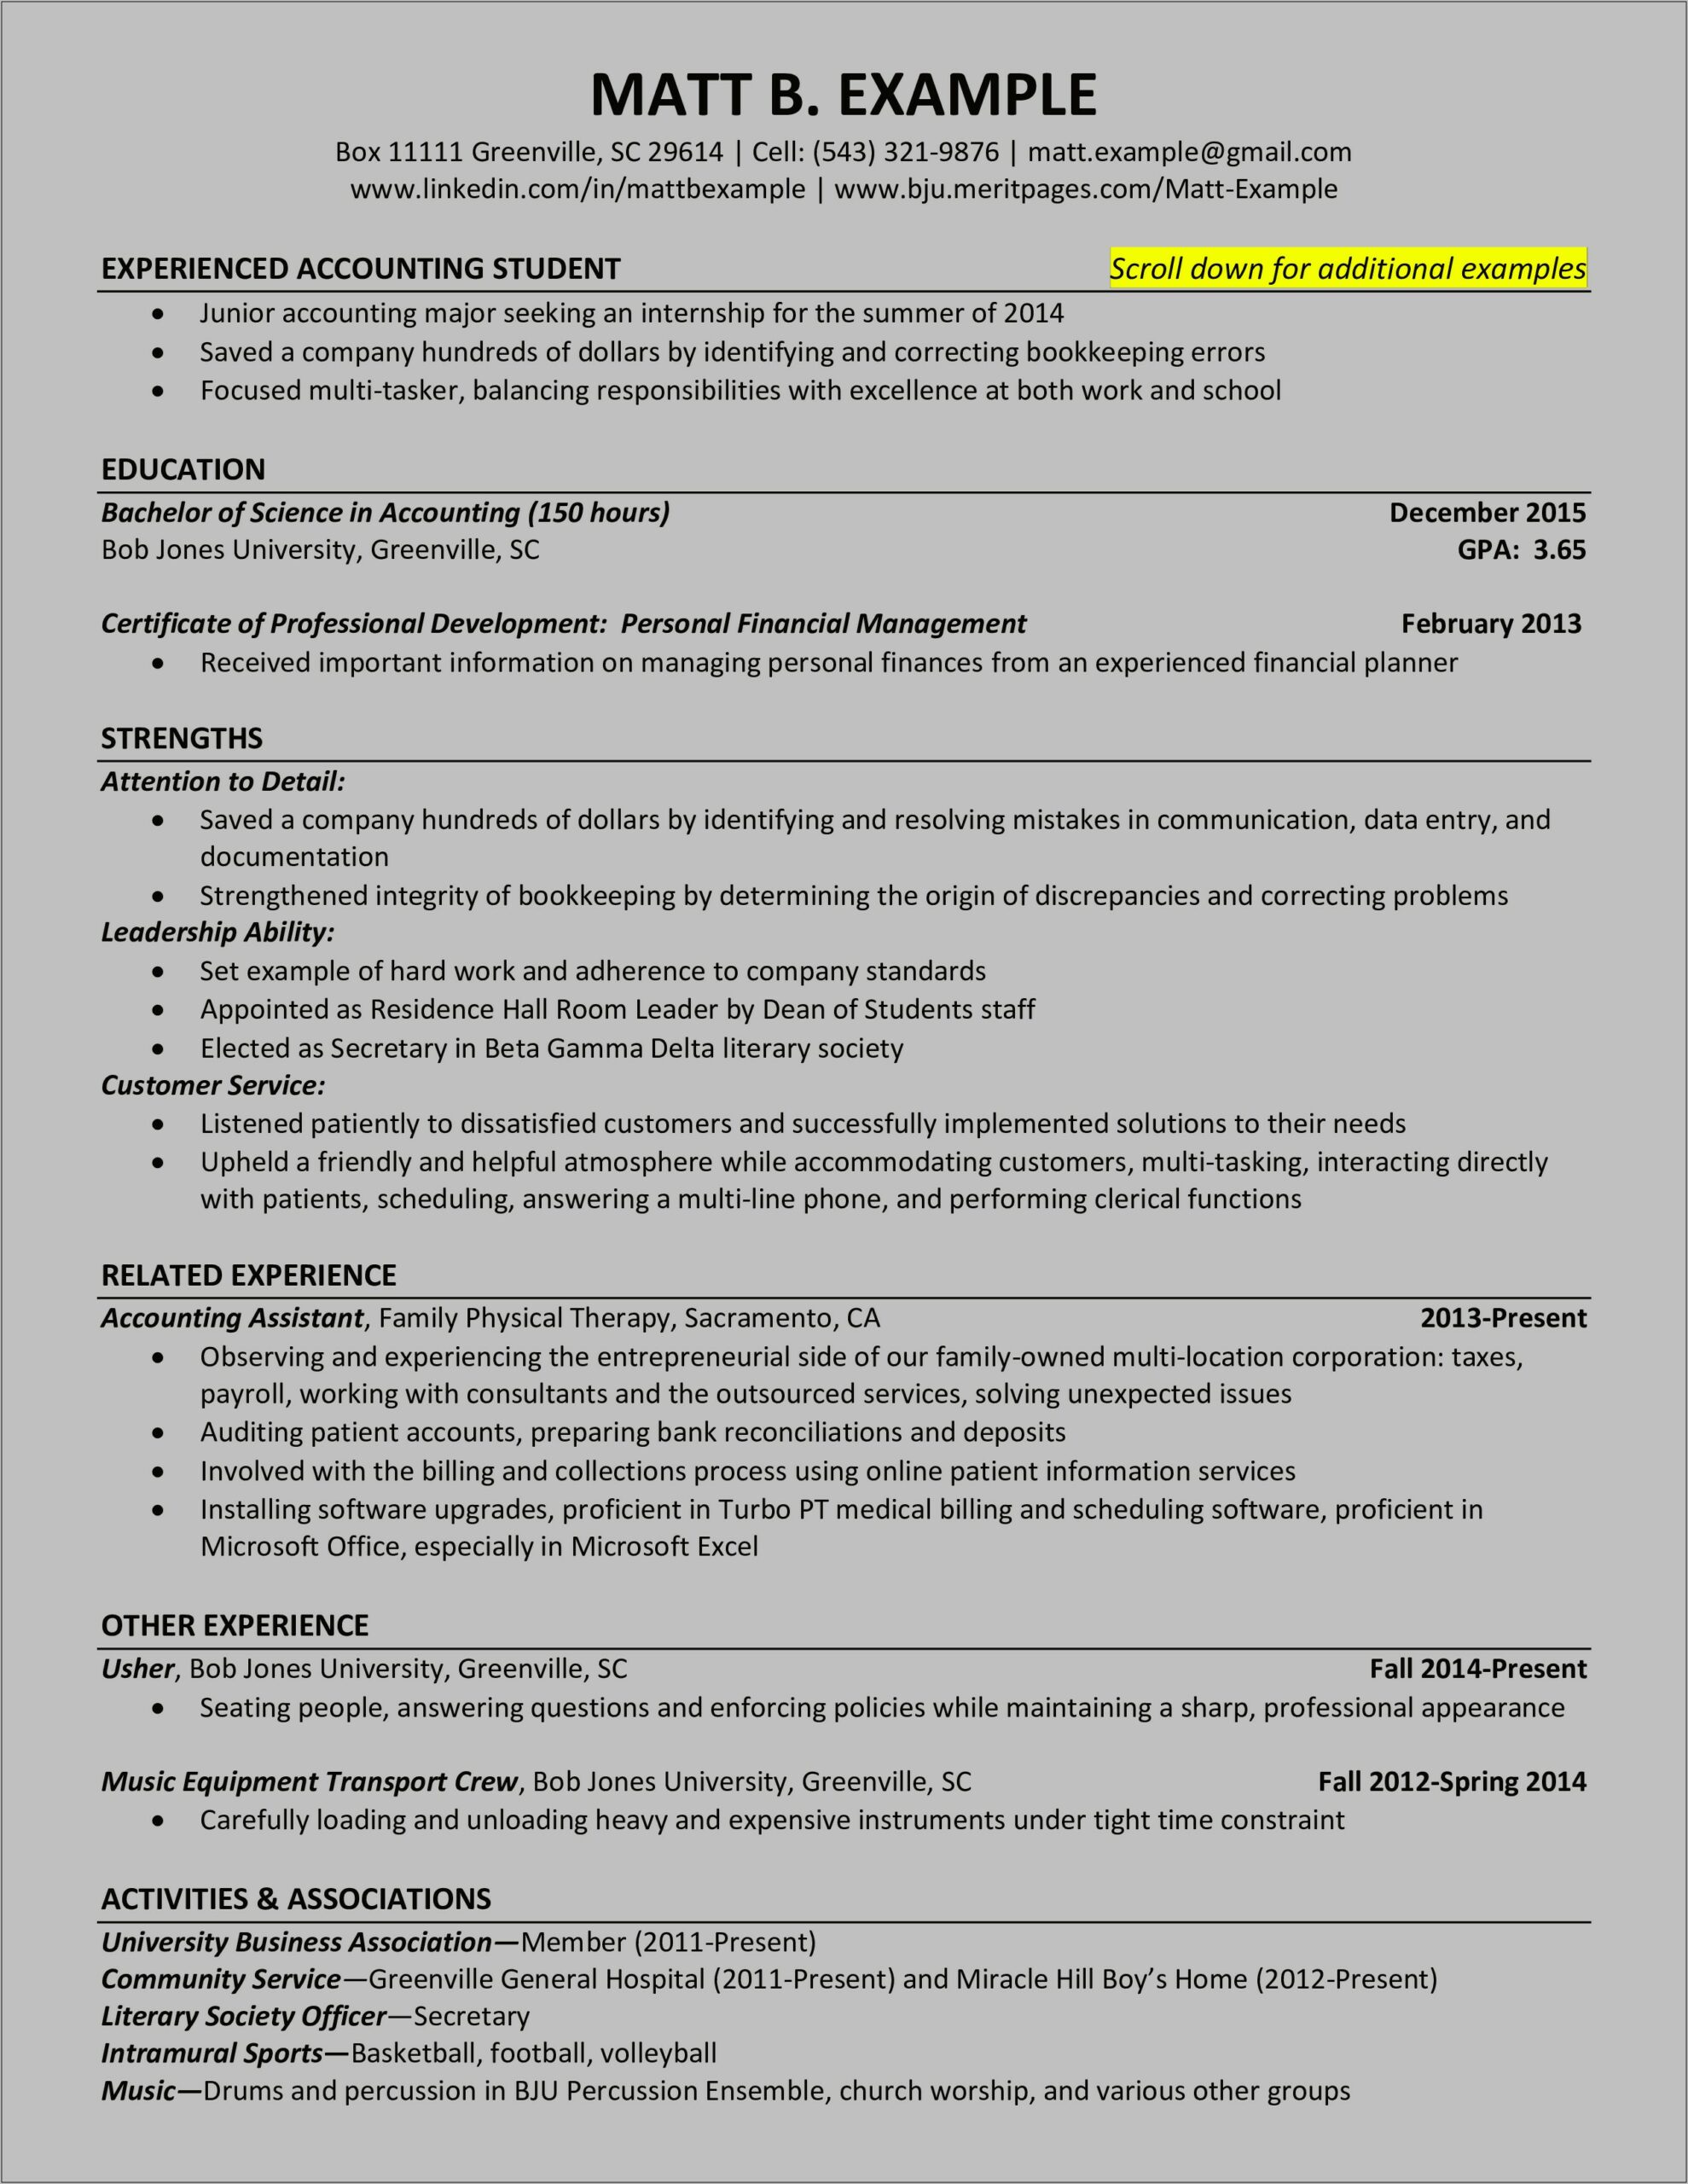 Resume In Word Format For An Accountant